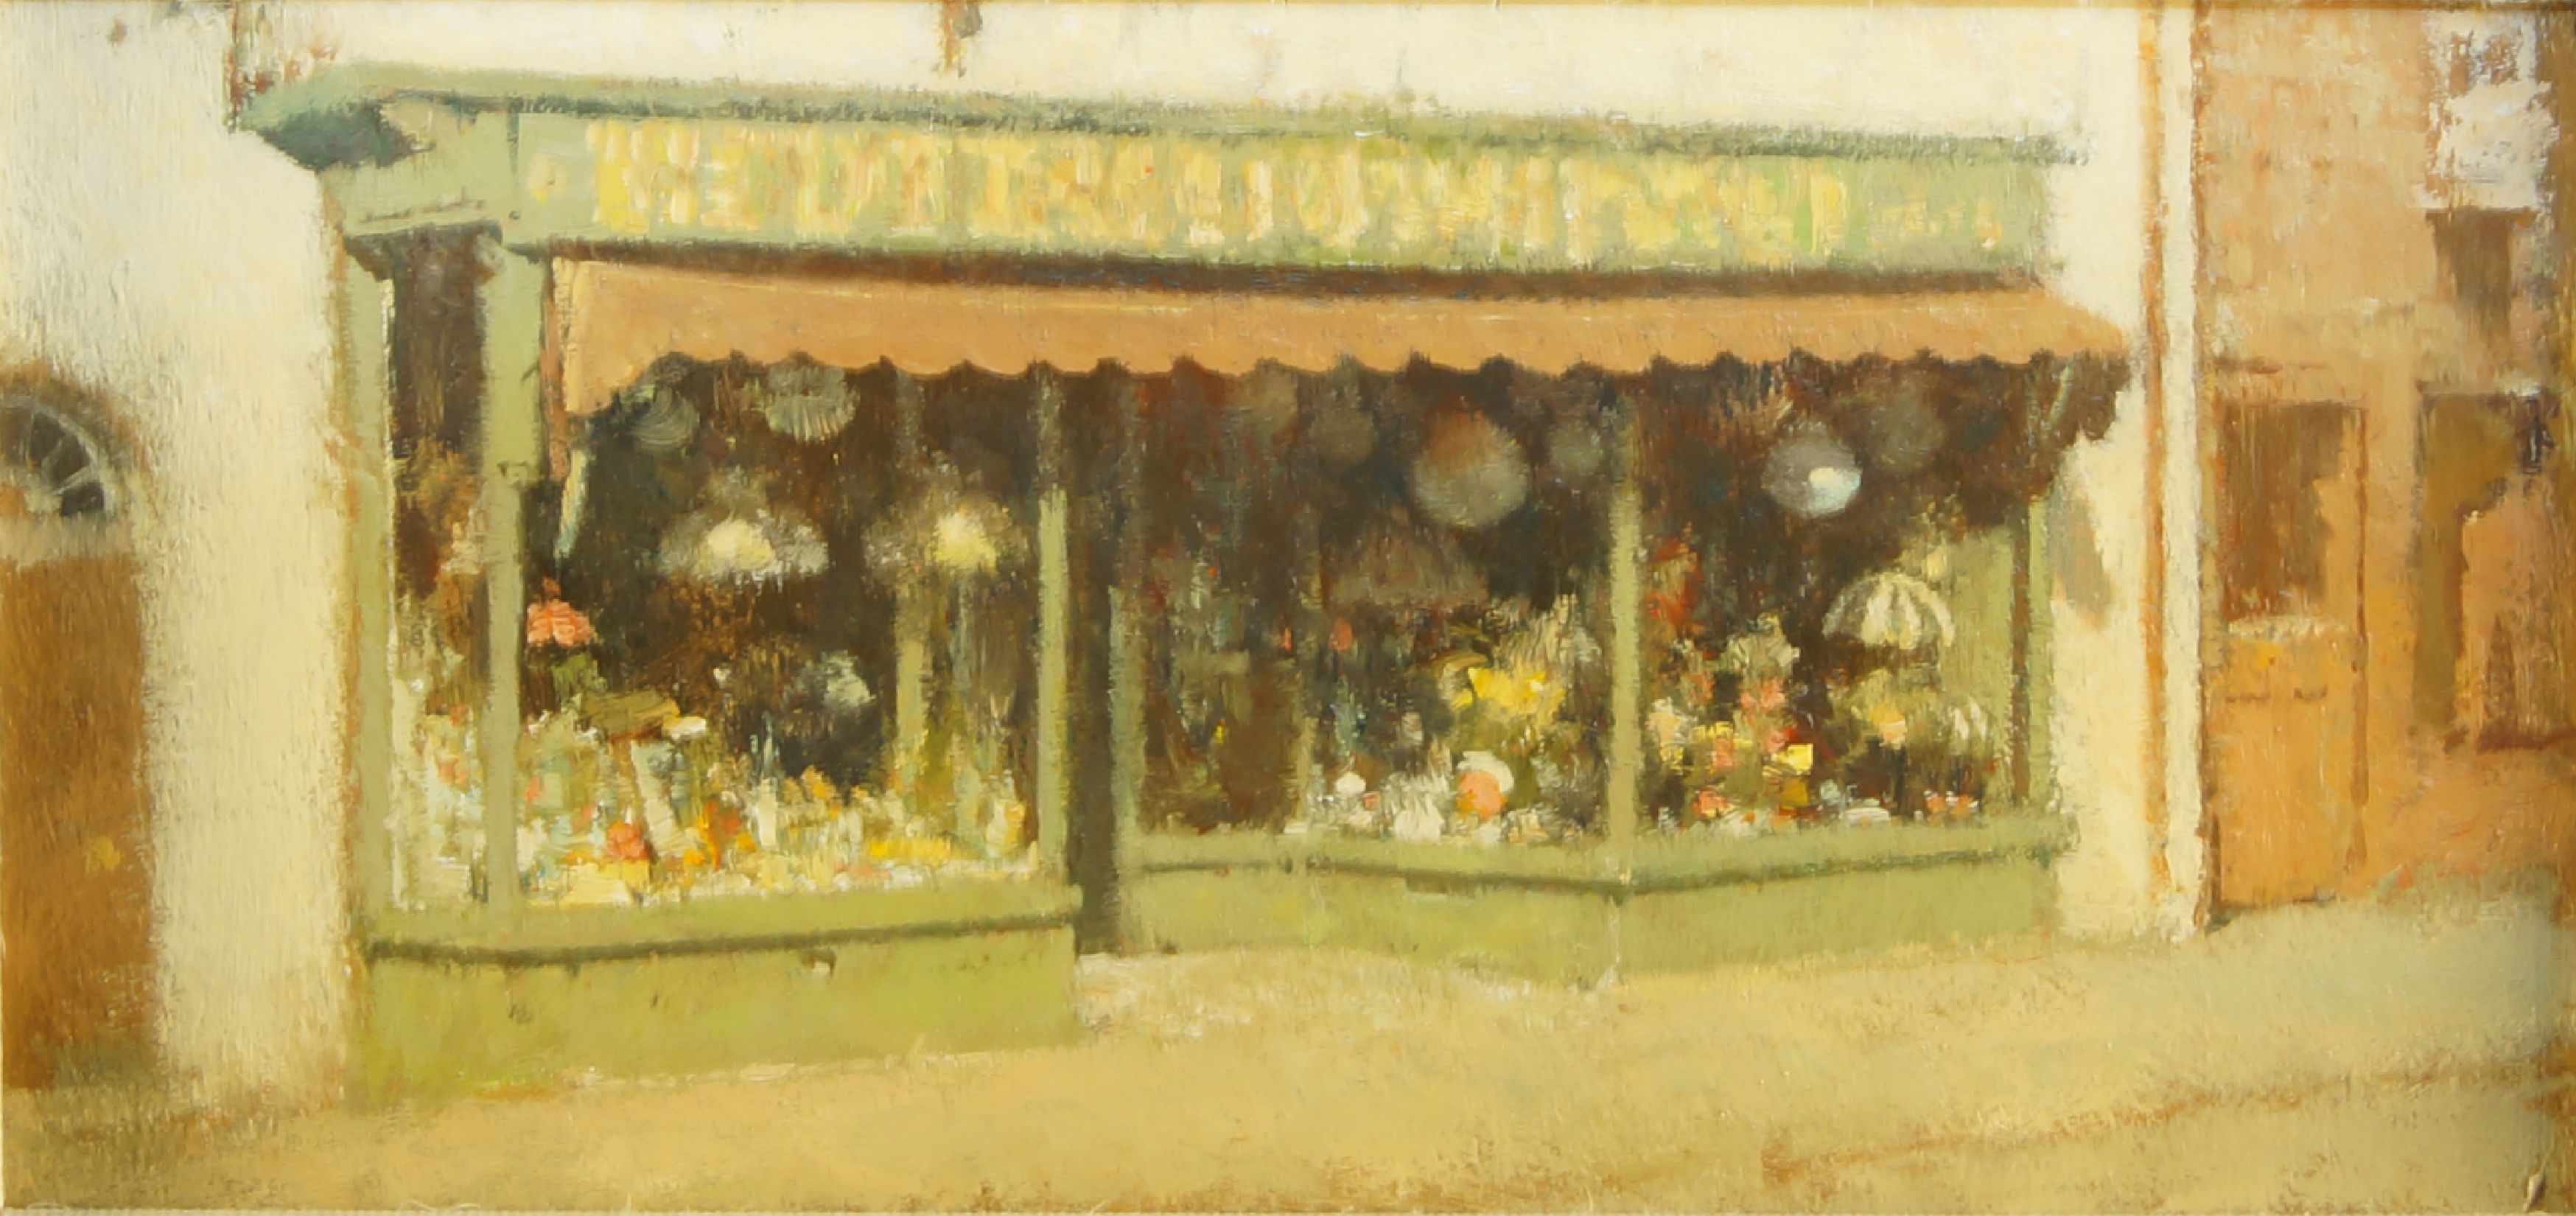 Oliver Ommanney, British, 20th century- Early morning south street, Bridport; oil on board, 9.5 x